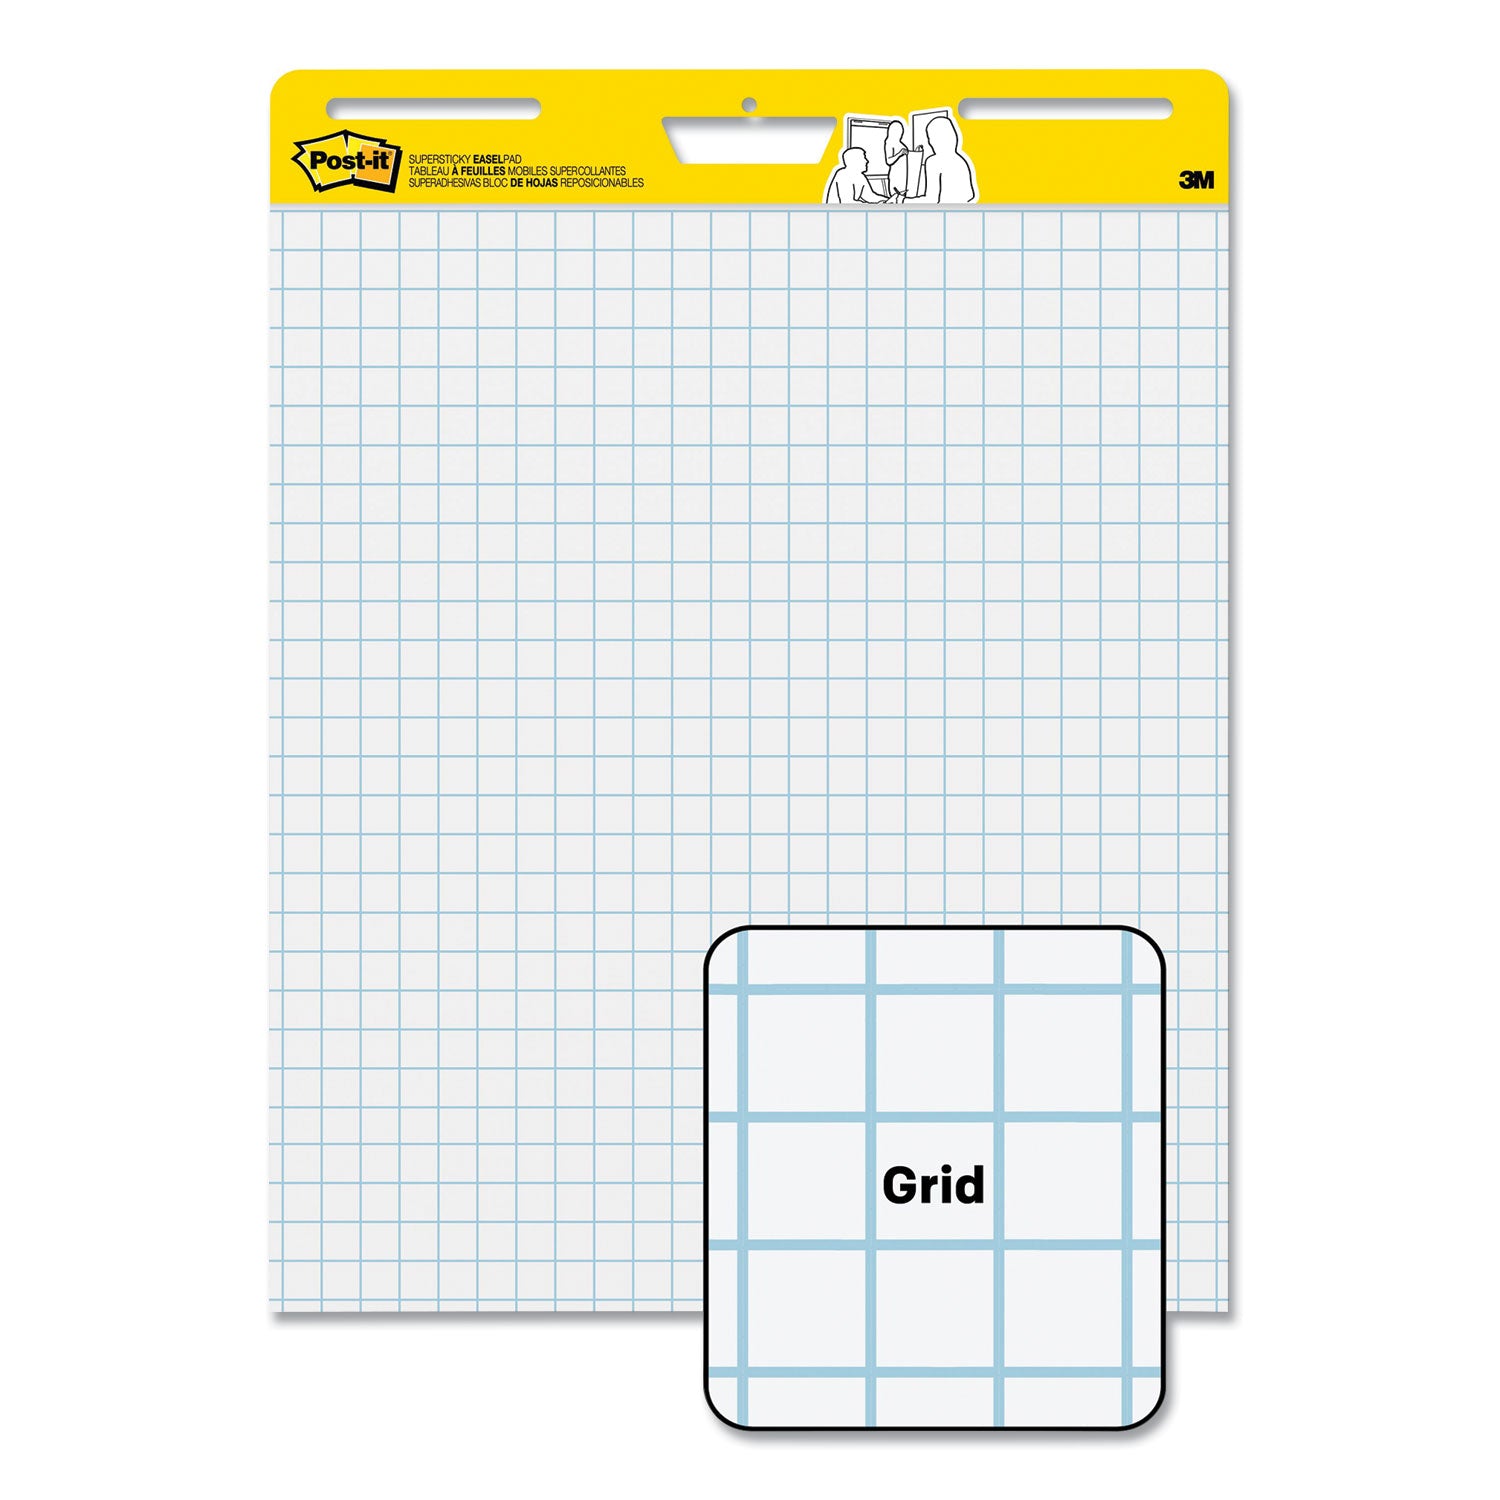 vertical-orientation-self-stick-easel-pads-quadrille-rule-1-sq-in-25-x-30-white-30-sheets-6-pack_mmm560vad6pk - 7